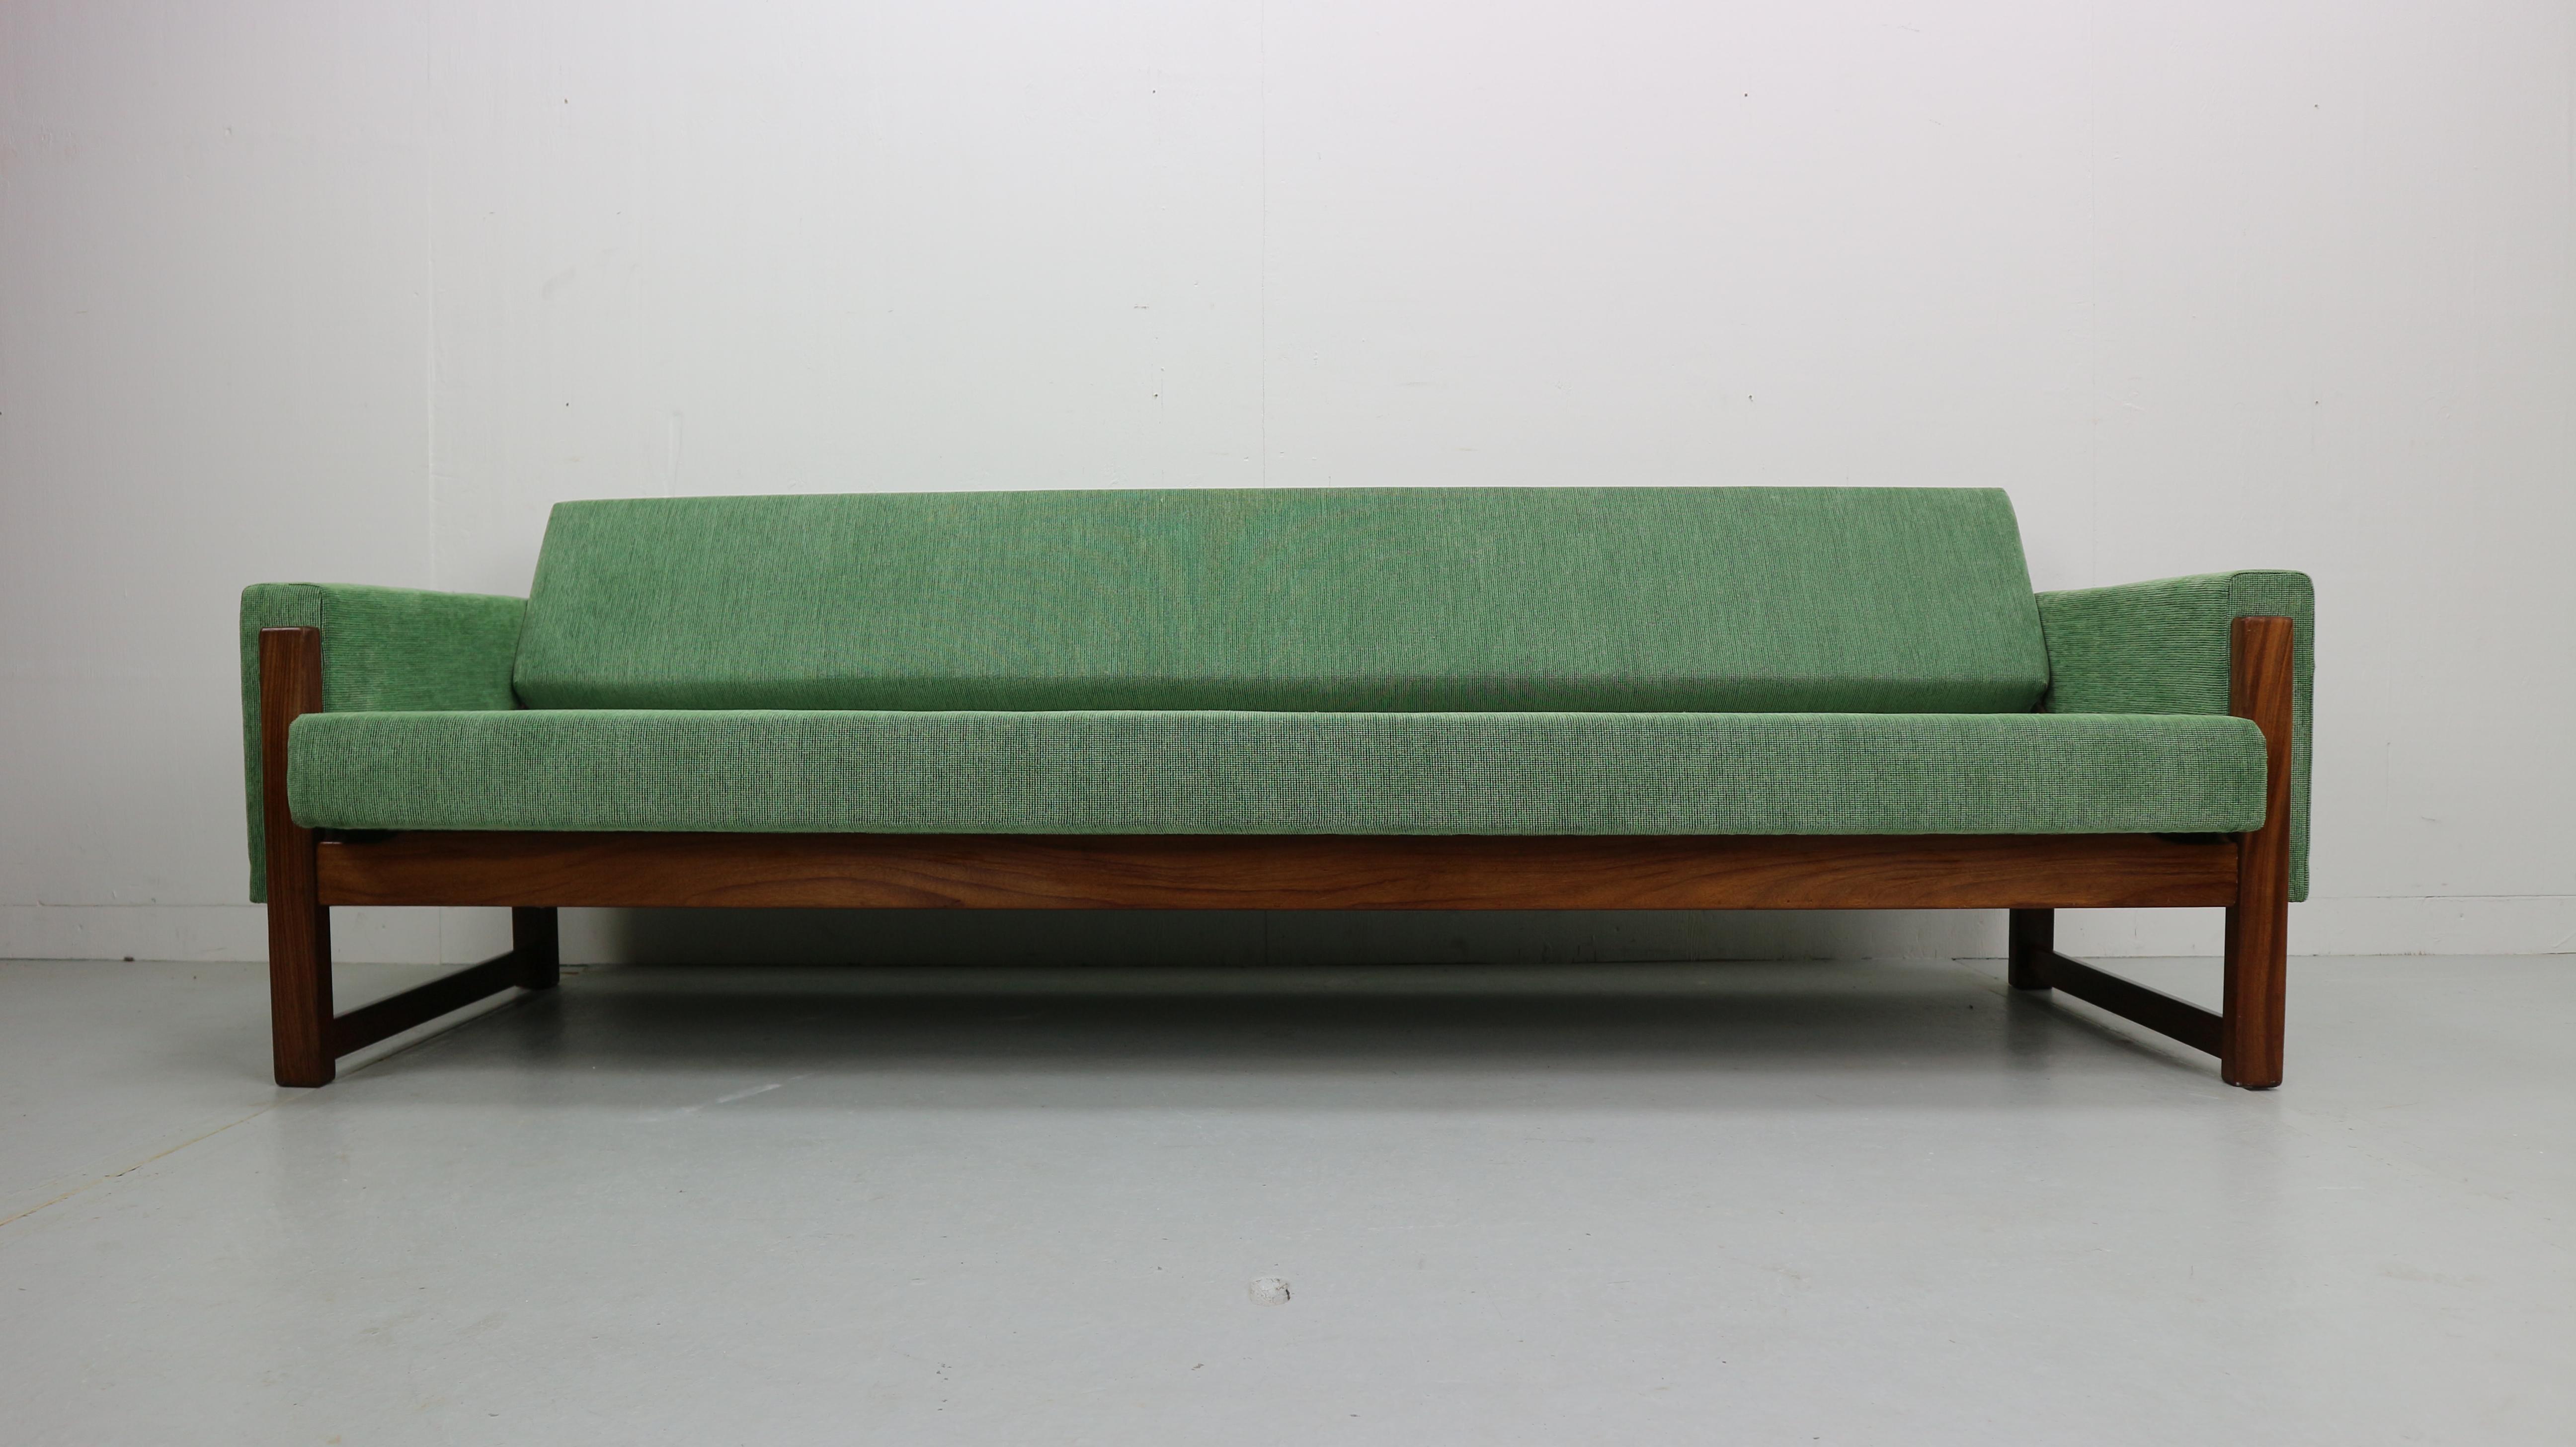 This three-seat sofa-bed, model MX 01, was designed in the 1960s by Yngve Ekstrom and manufactured by Pastoe. It features a wooden frame and has new green upholstery. The sofa back can be reclined to be a bed.